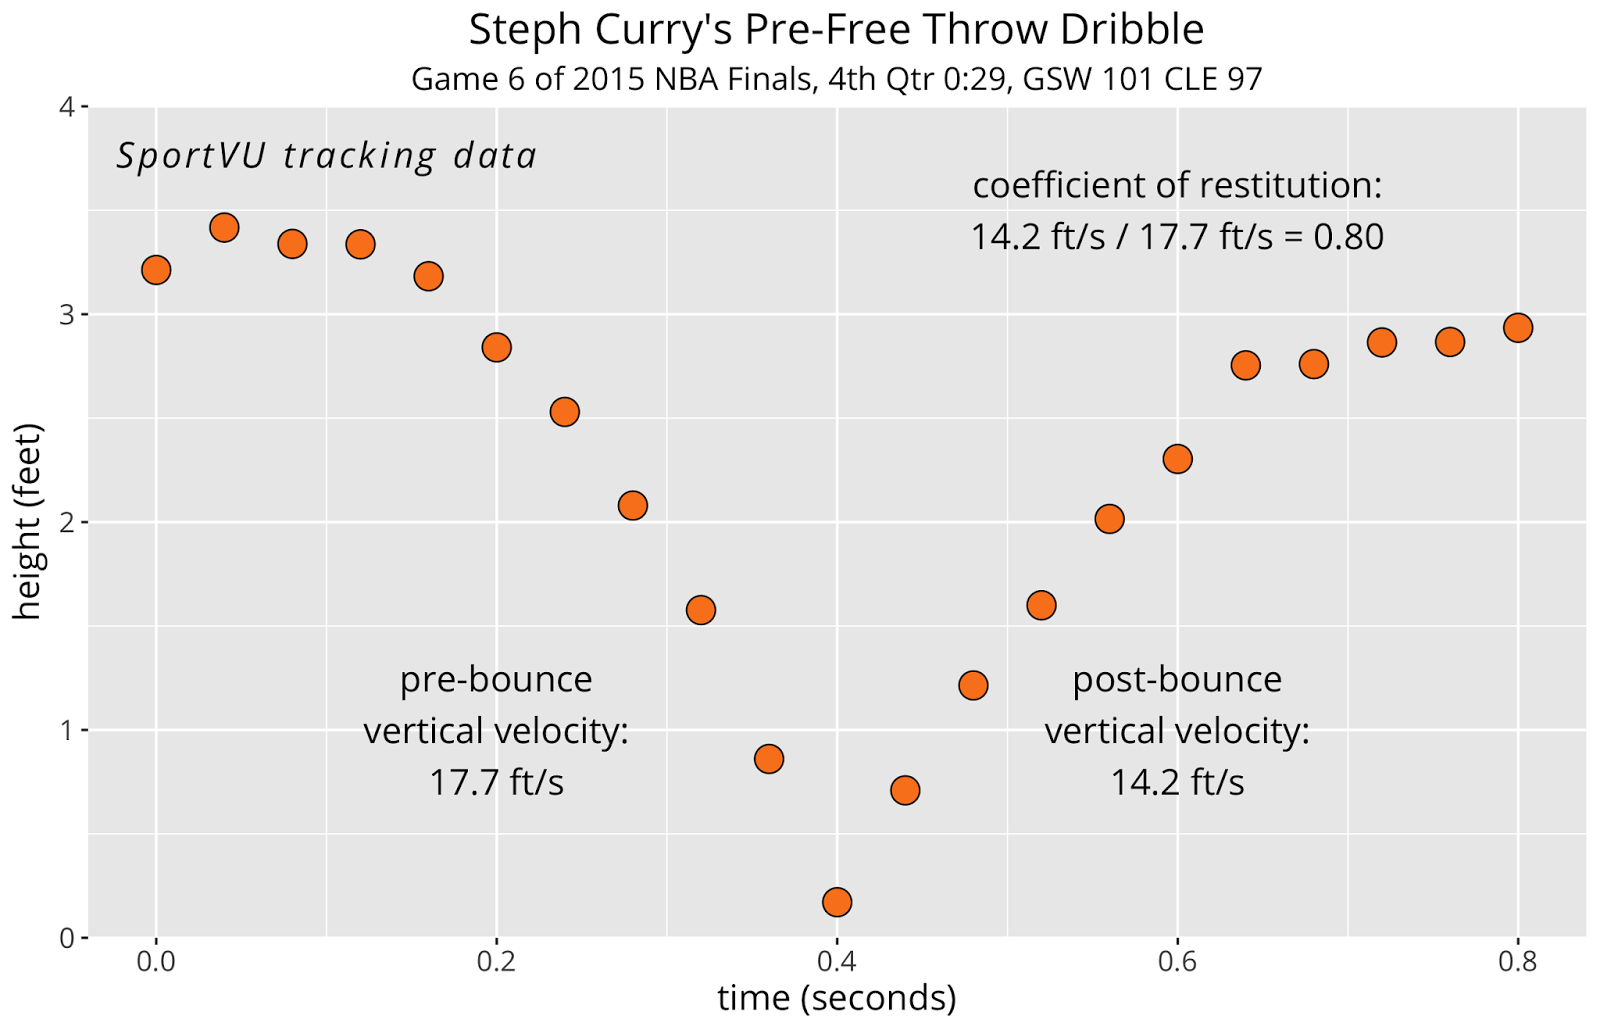 Judging Win Probability Models - inpredictable